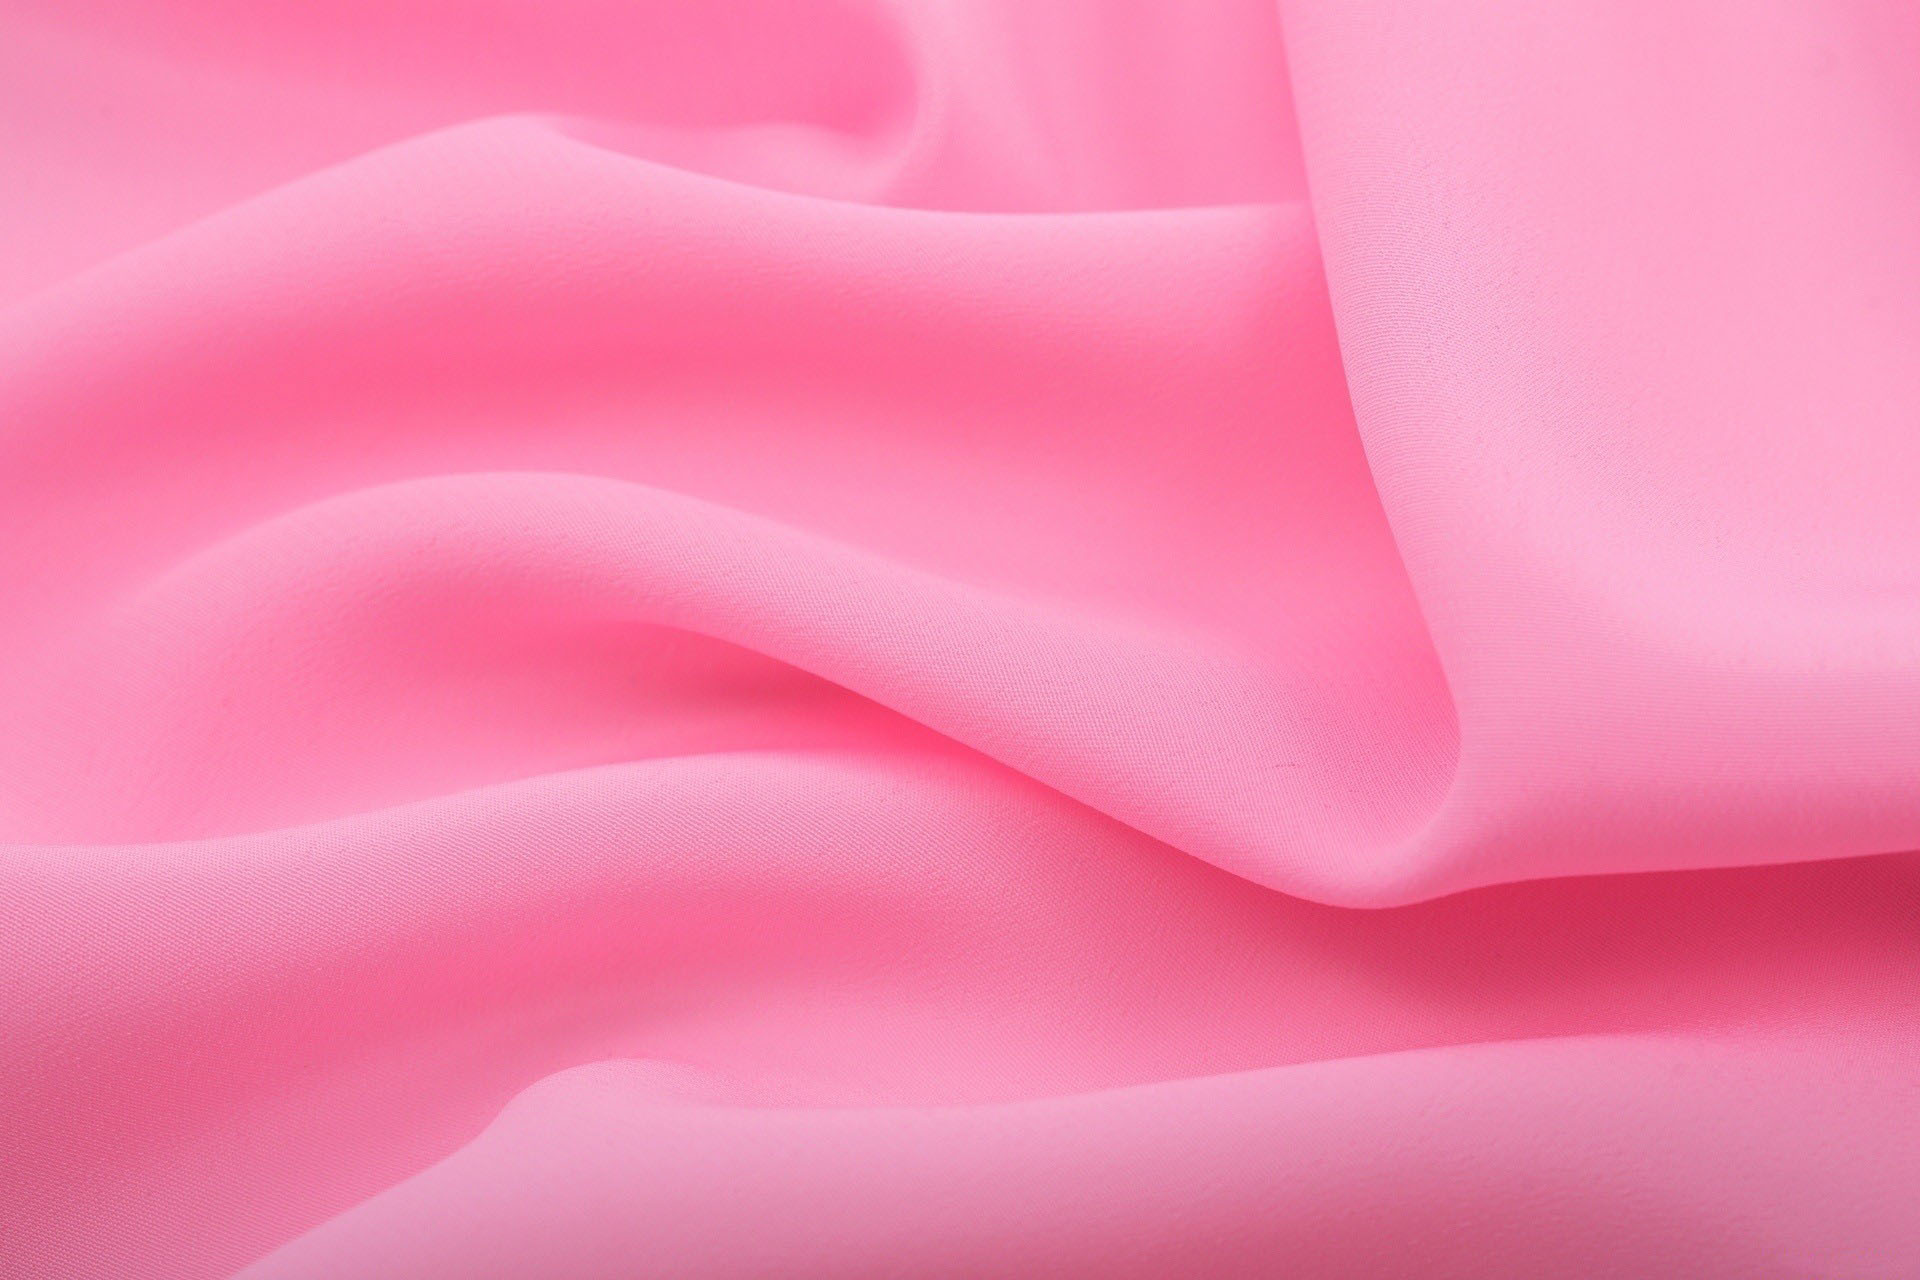 textures, pink, tenderness, texture, cloth High Definition image